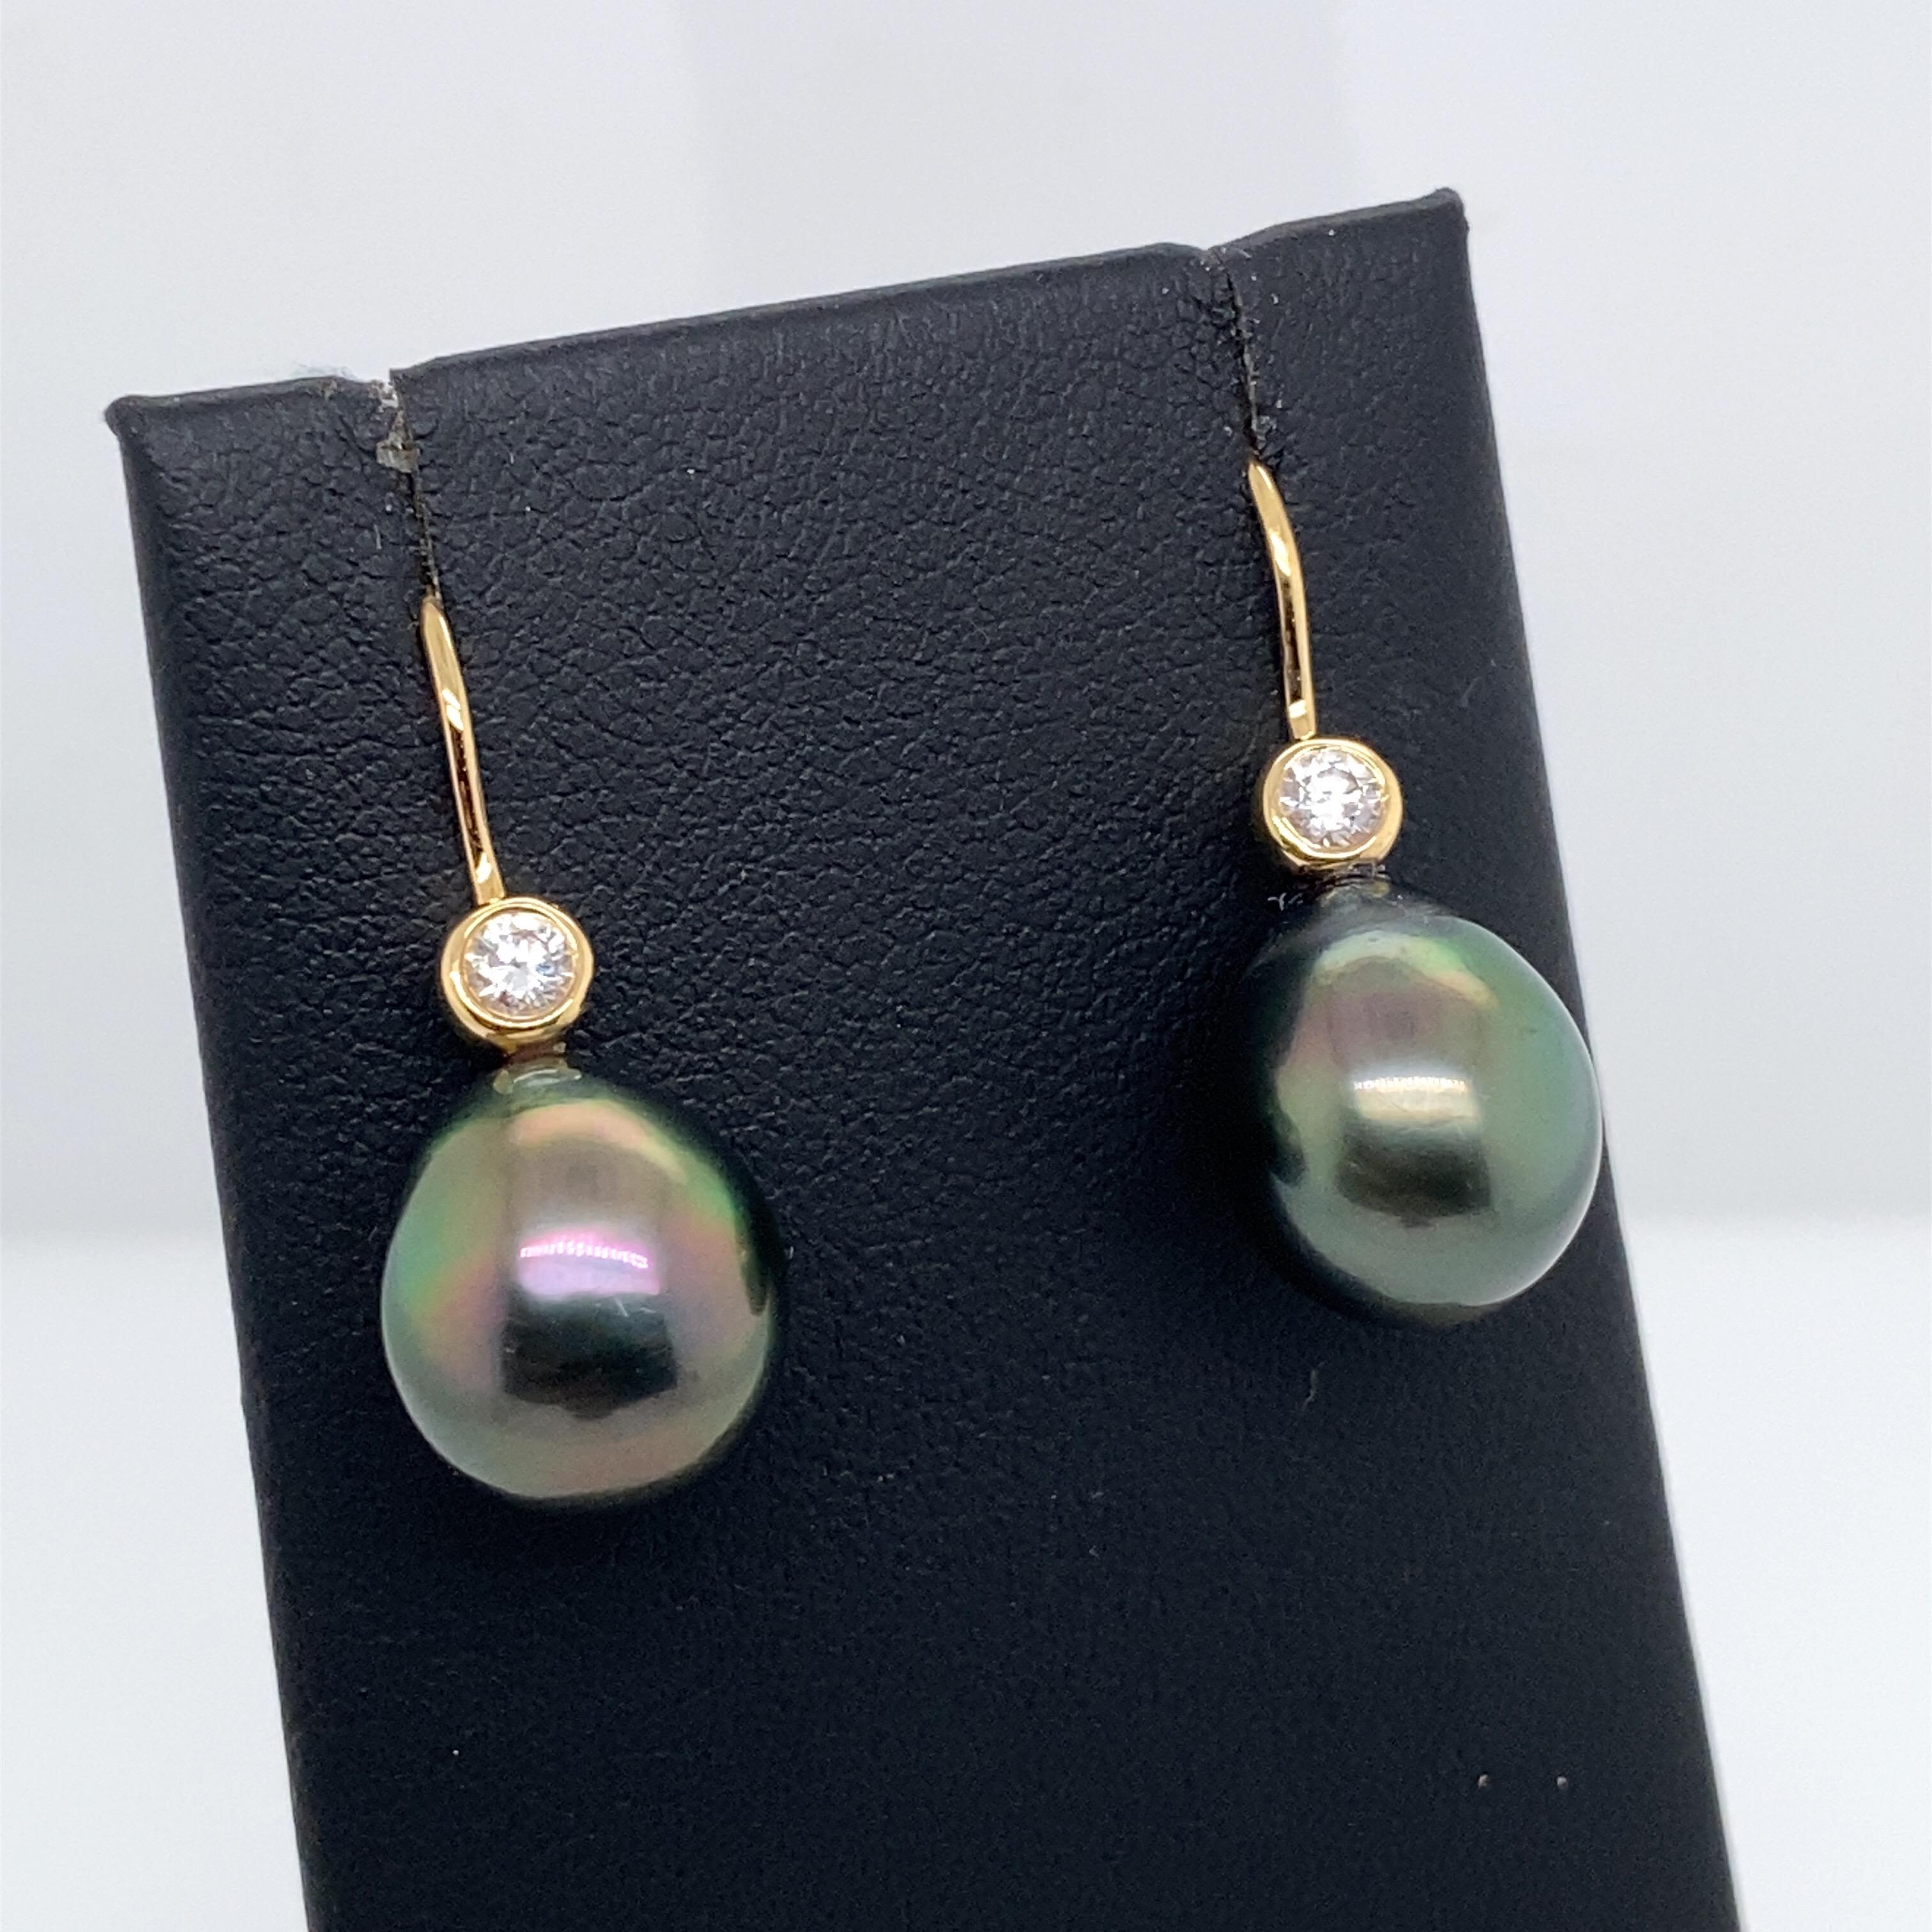 18K Yellow gold drop earrings featuring two Tahitian pearls measuring 11-12 mm with bezel set round brilliants weighing 0.20 carats. 
Color G-H
Clarity SI